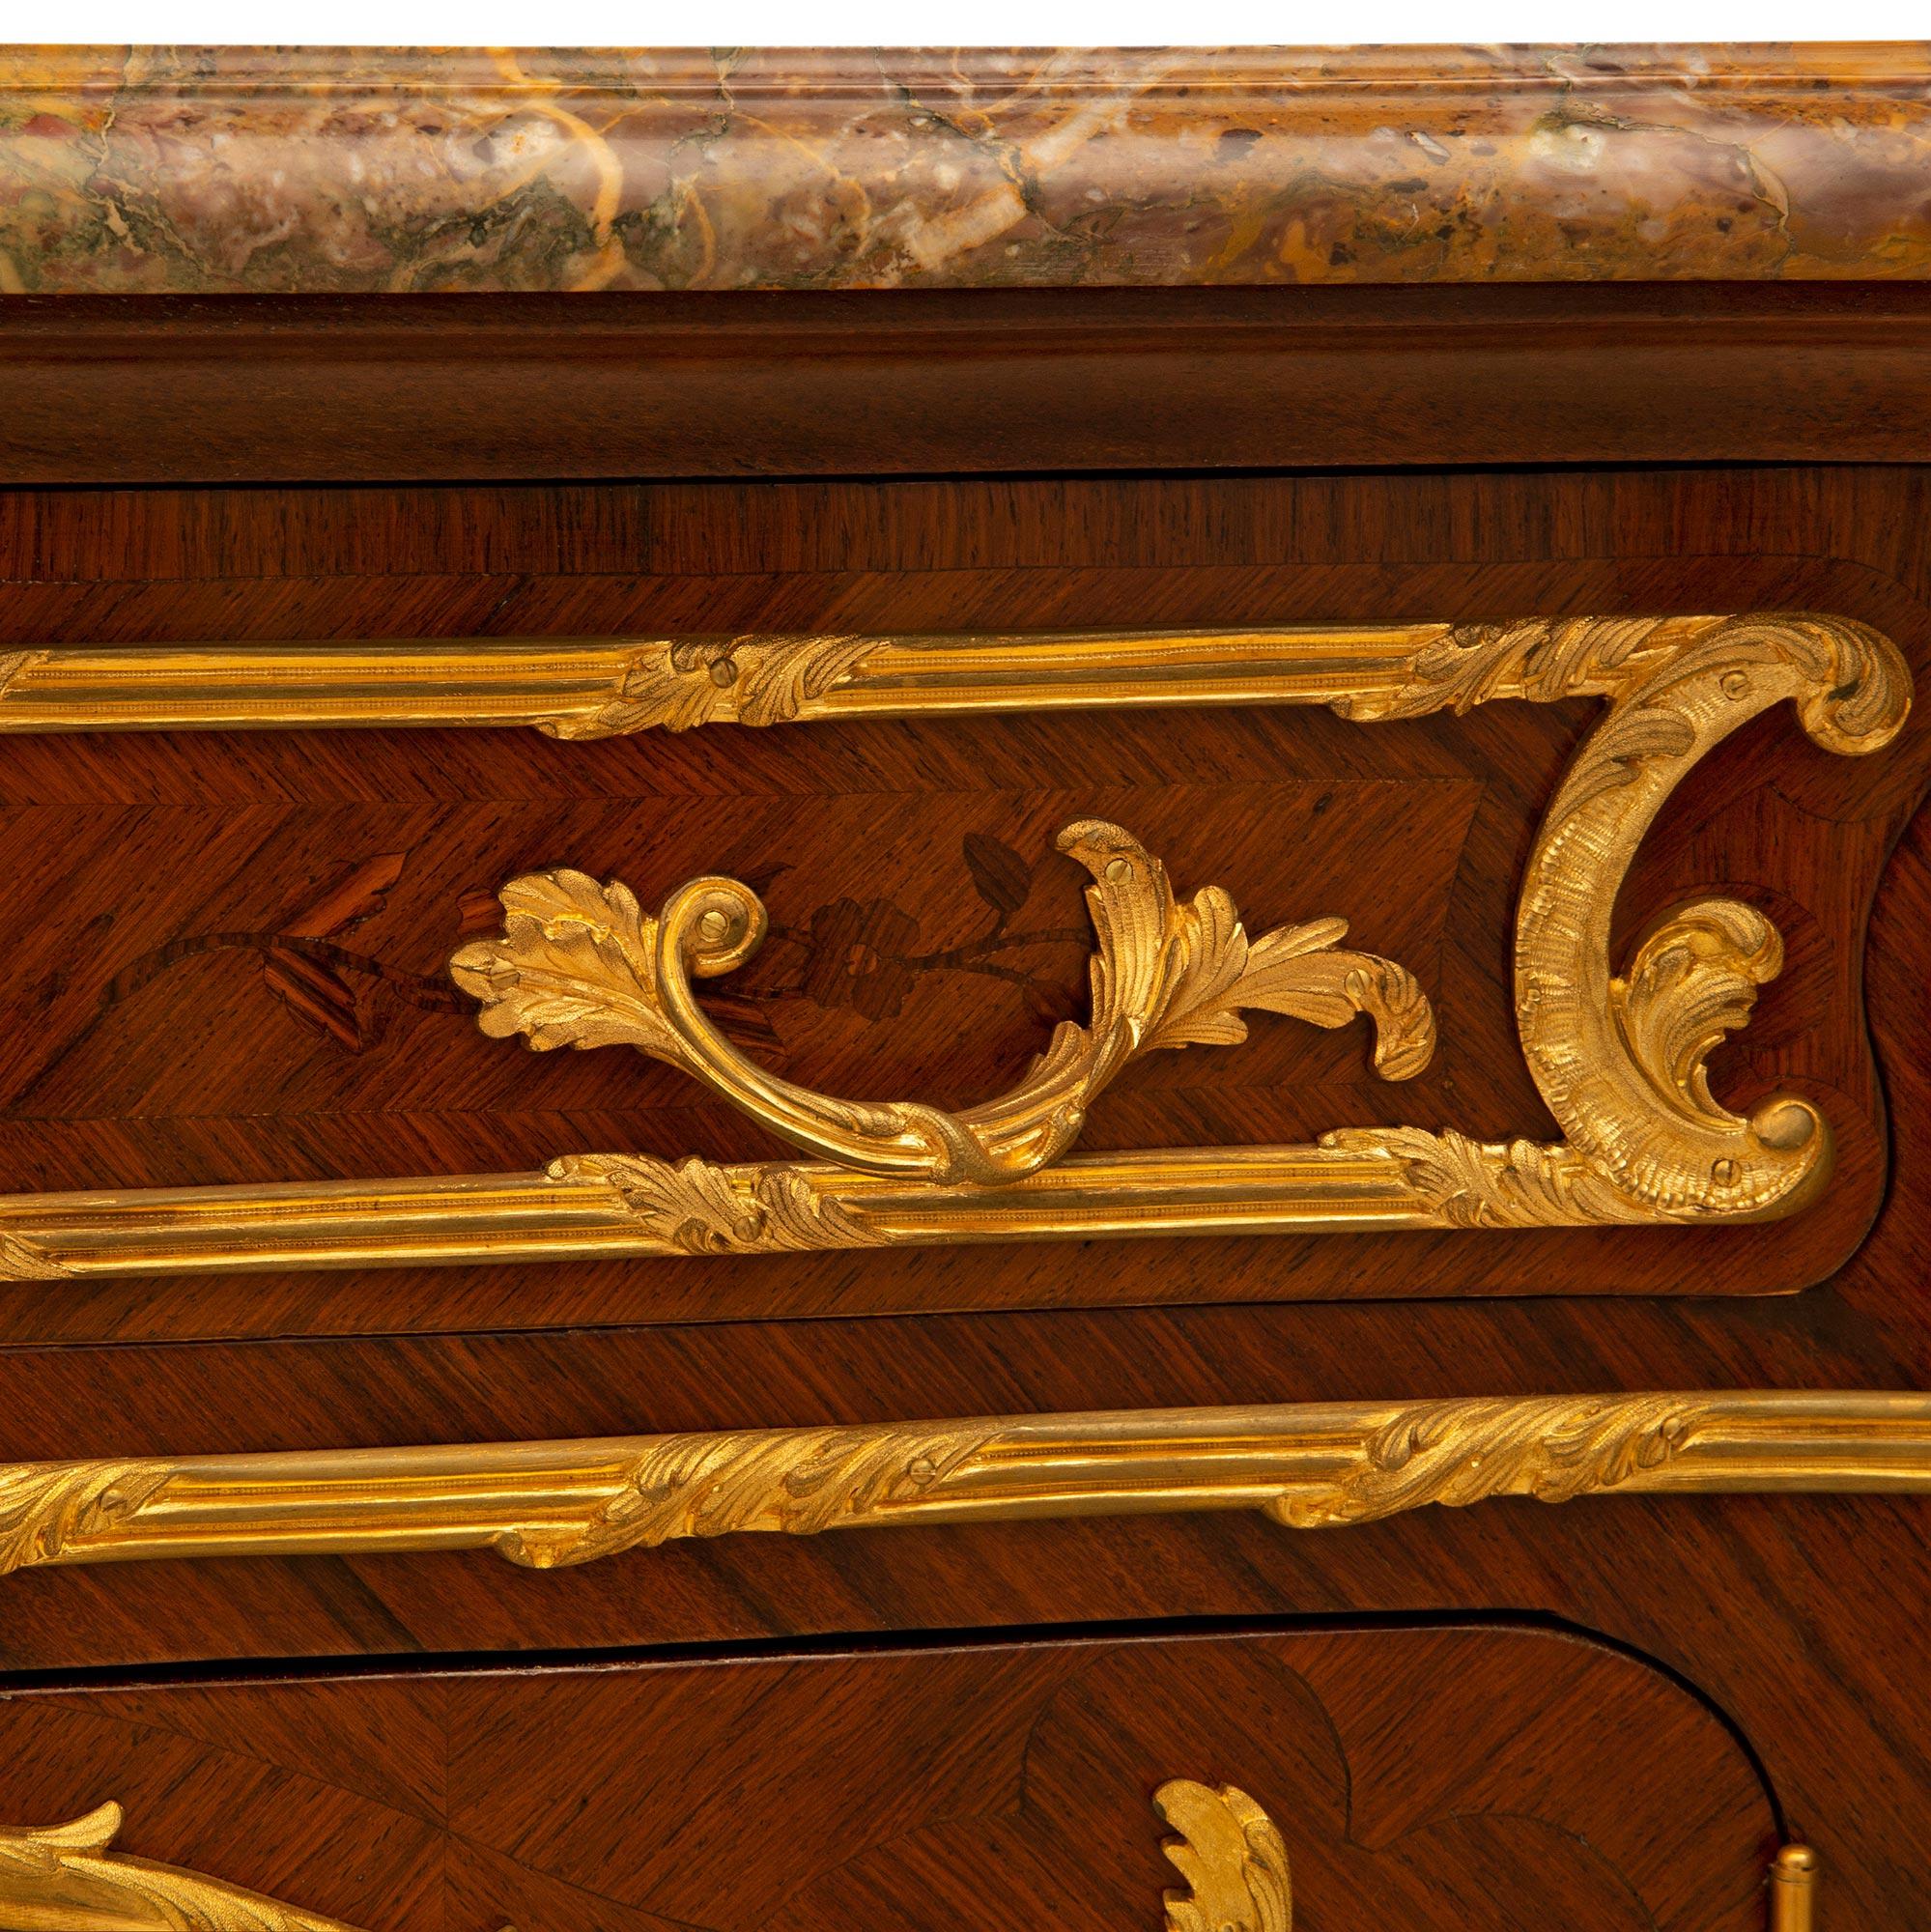 French 19th Century Louis XV Style Tulipwood Kingwood and Ormolu Cabinet For Sale 4